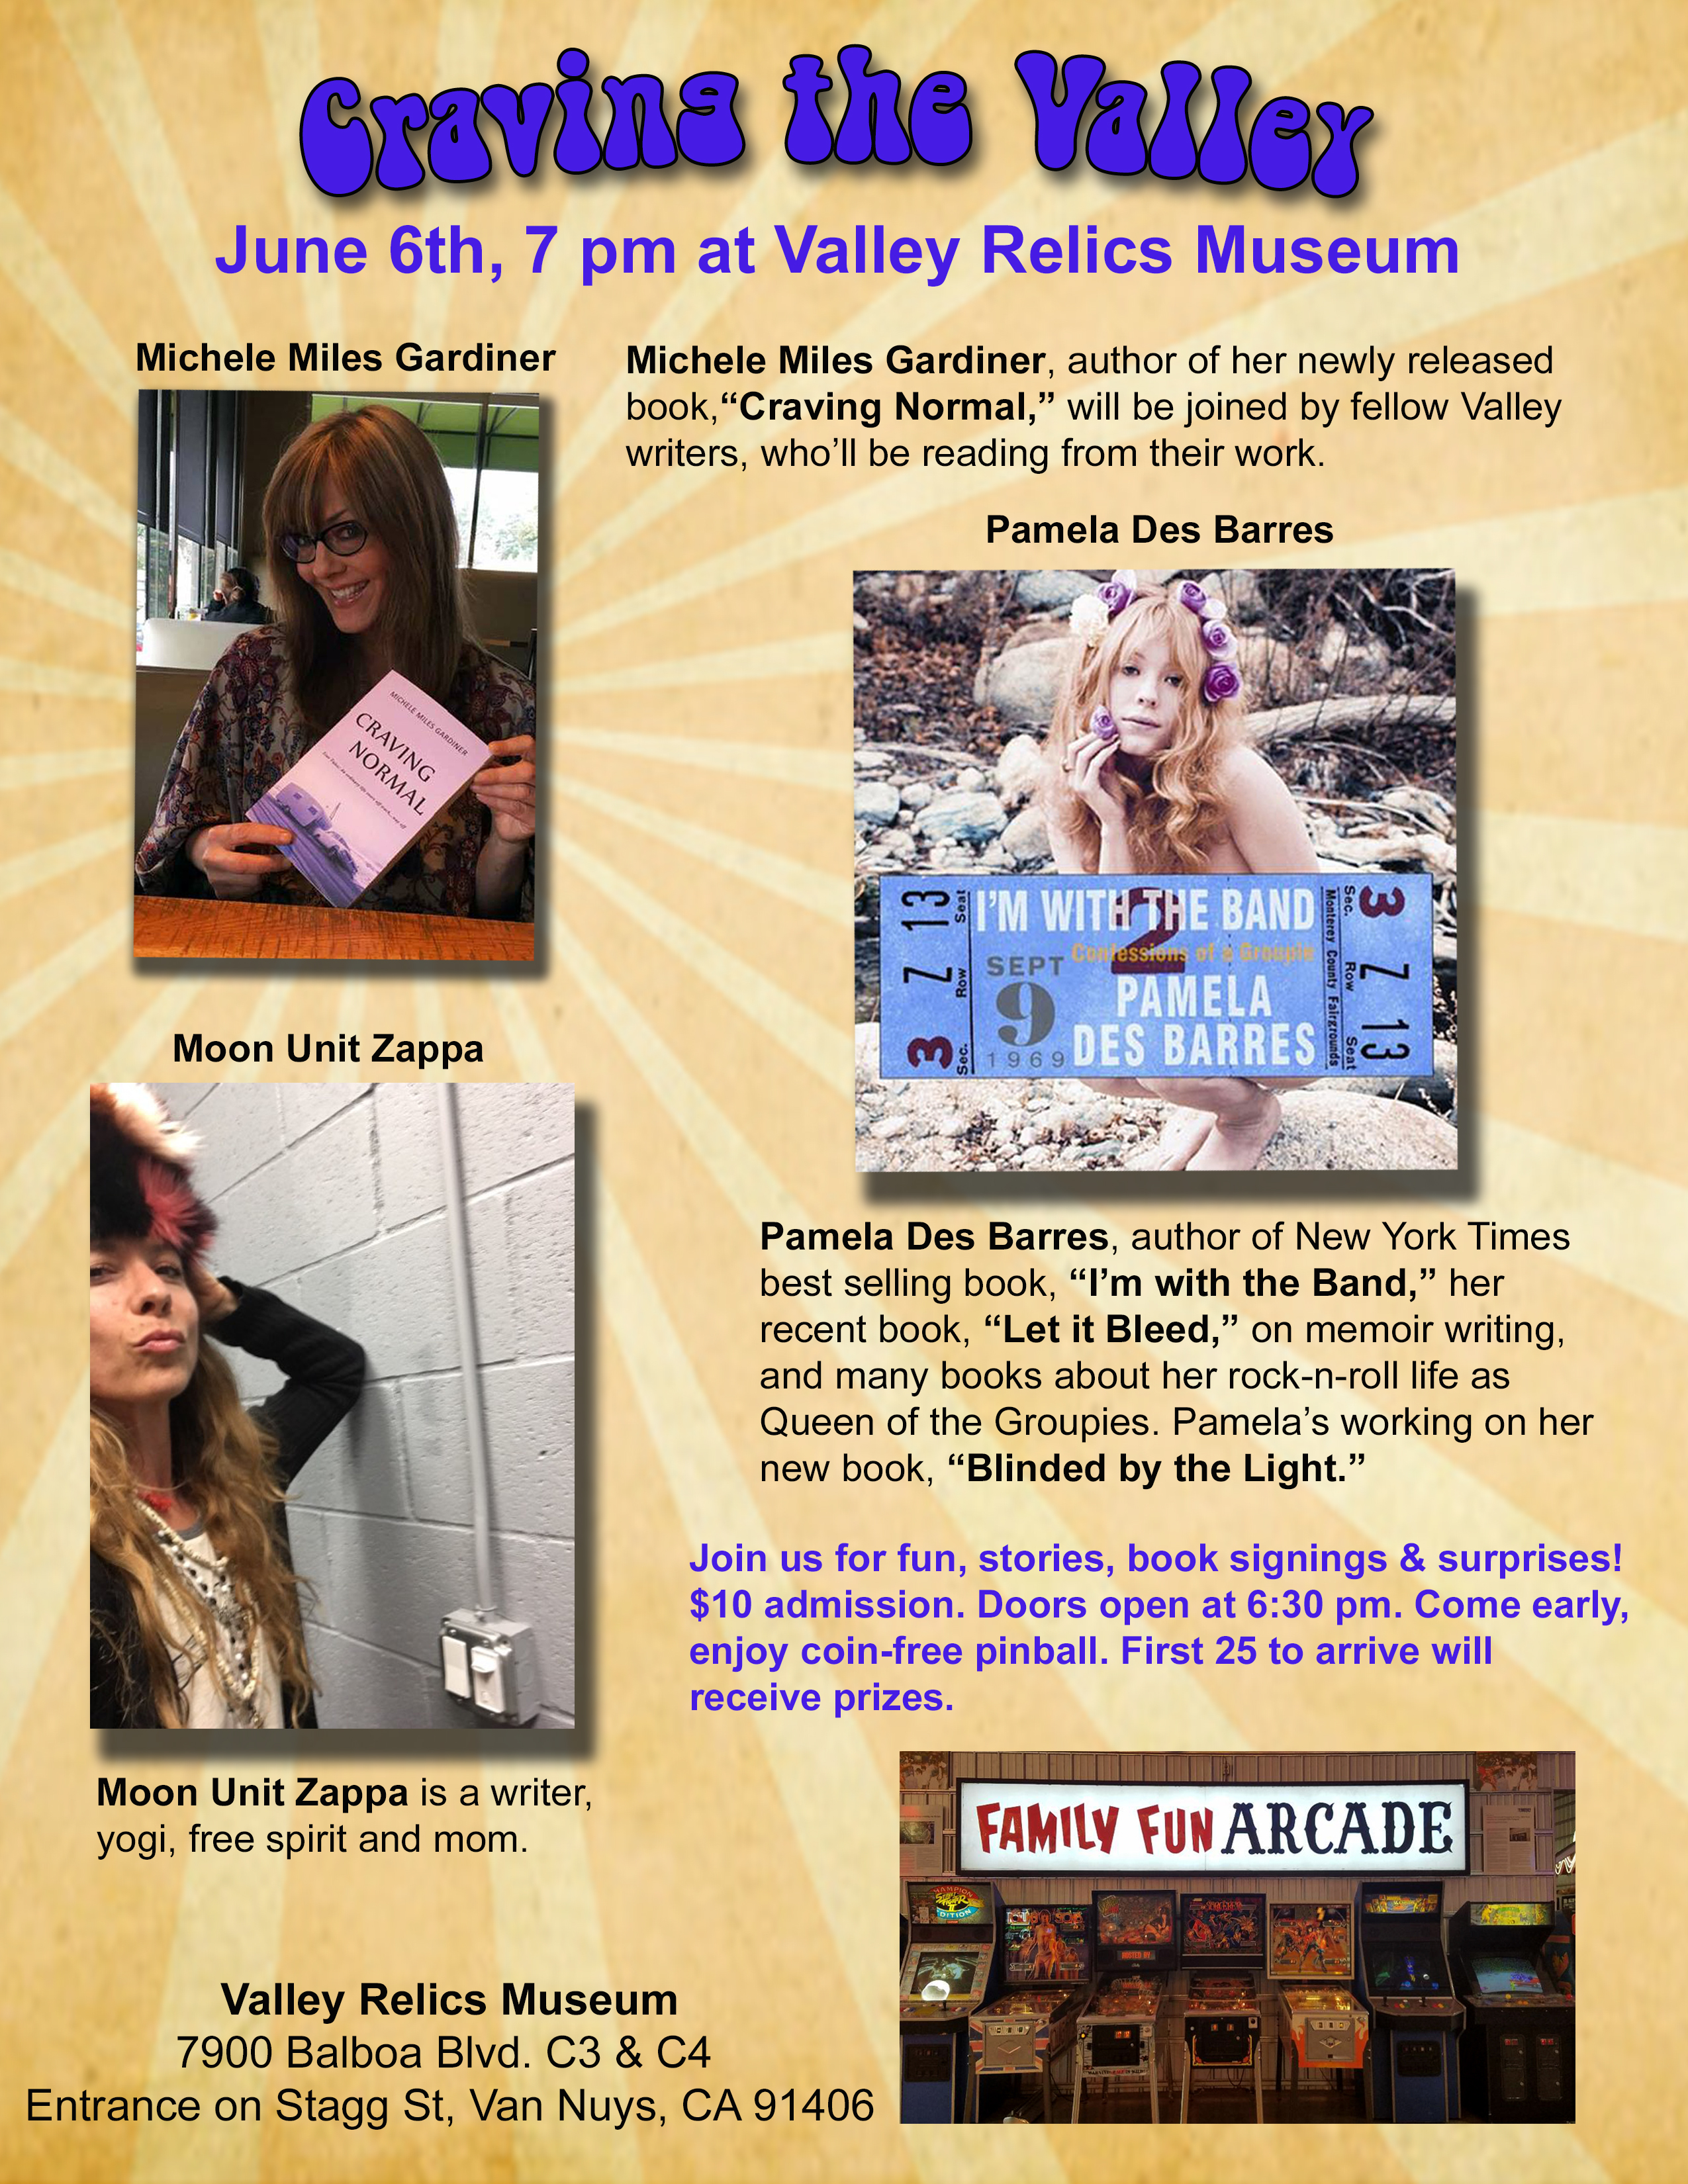 My first book event, June 6th. I'll be joined by some wildly entertaining writers: Pamela Des Barres and Moon Unit Zappa. It should be a rockin' and raucous evening. Join us at valley relics museum in the San Fernando Valley.